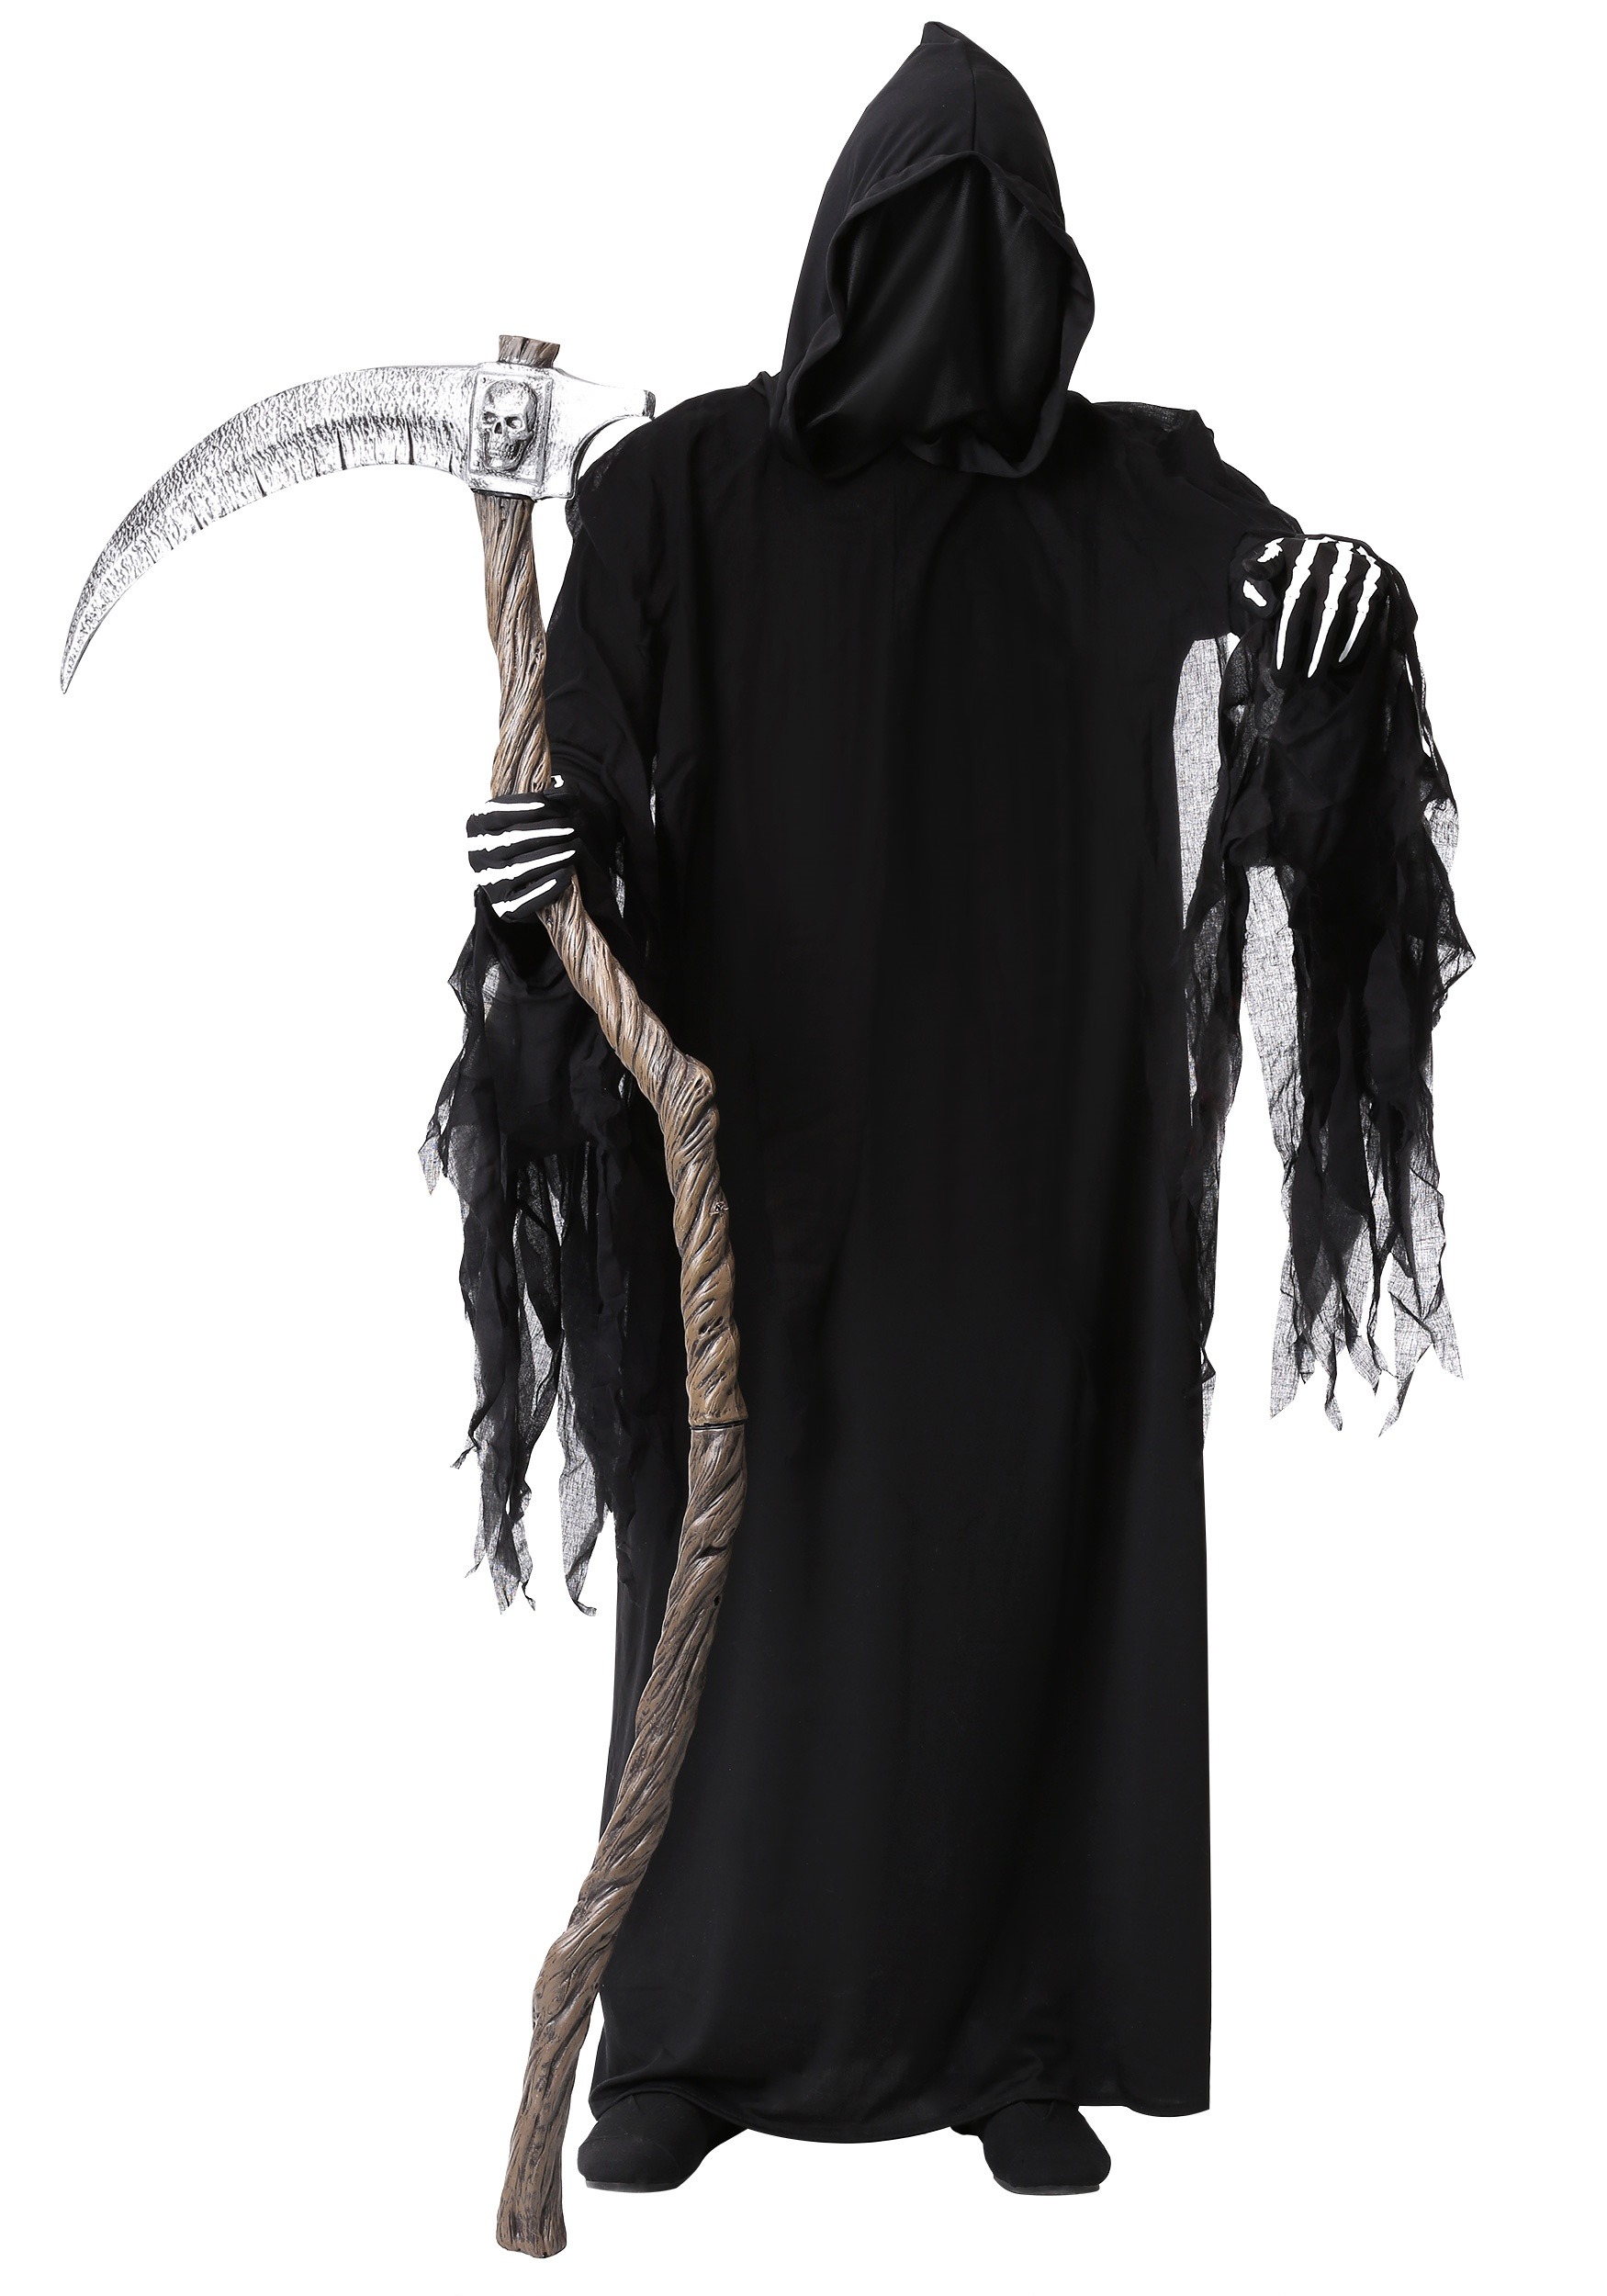 Adult Reaper Costume W/ Hooded Scary